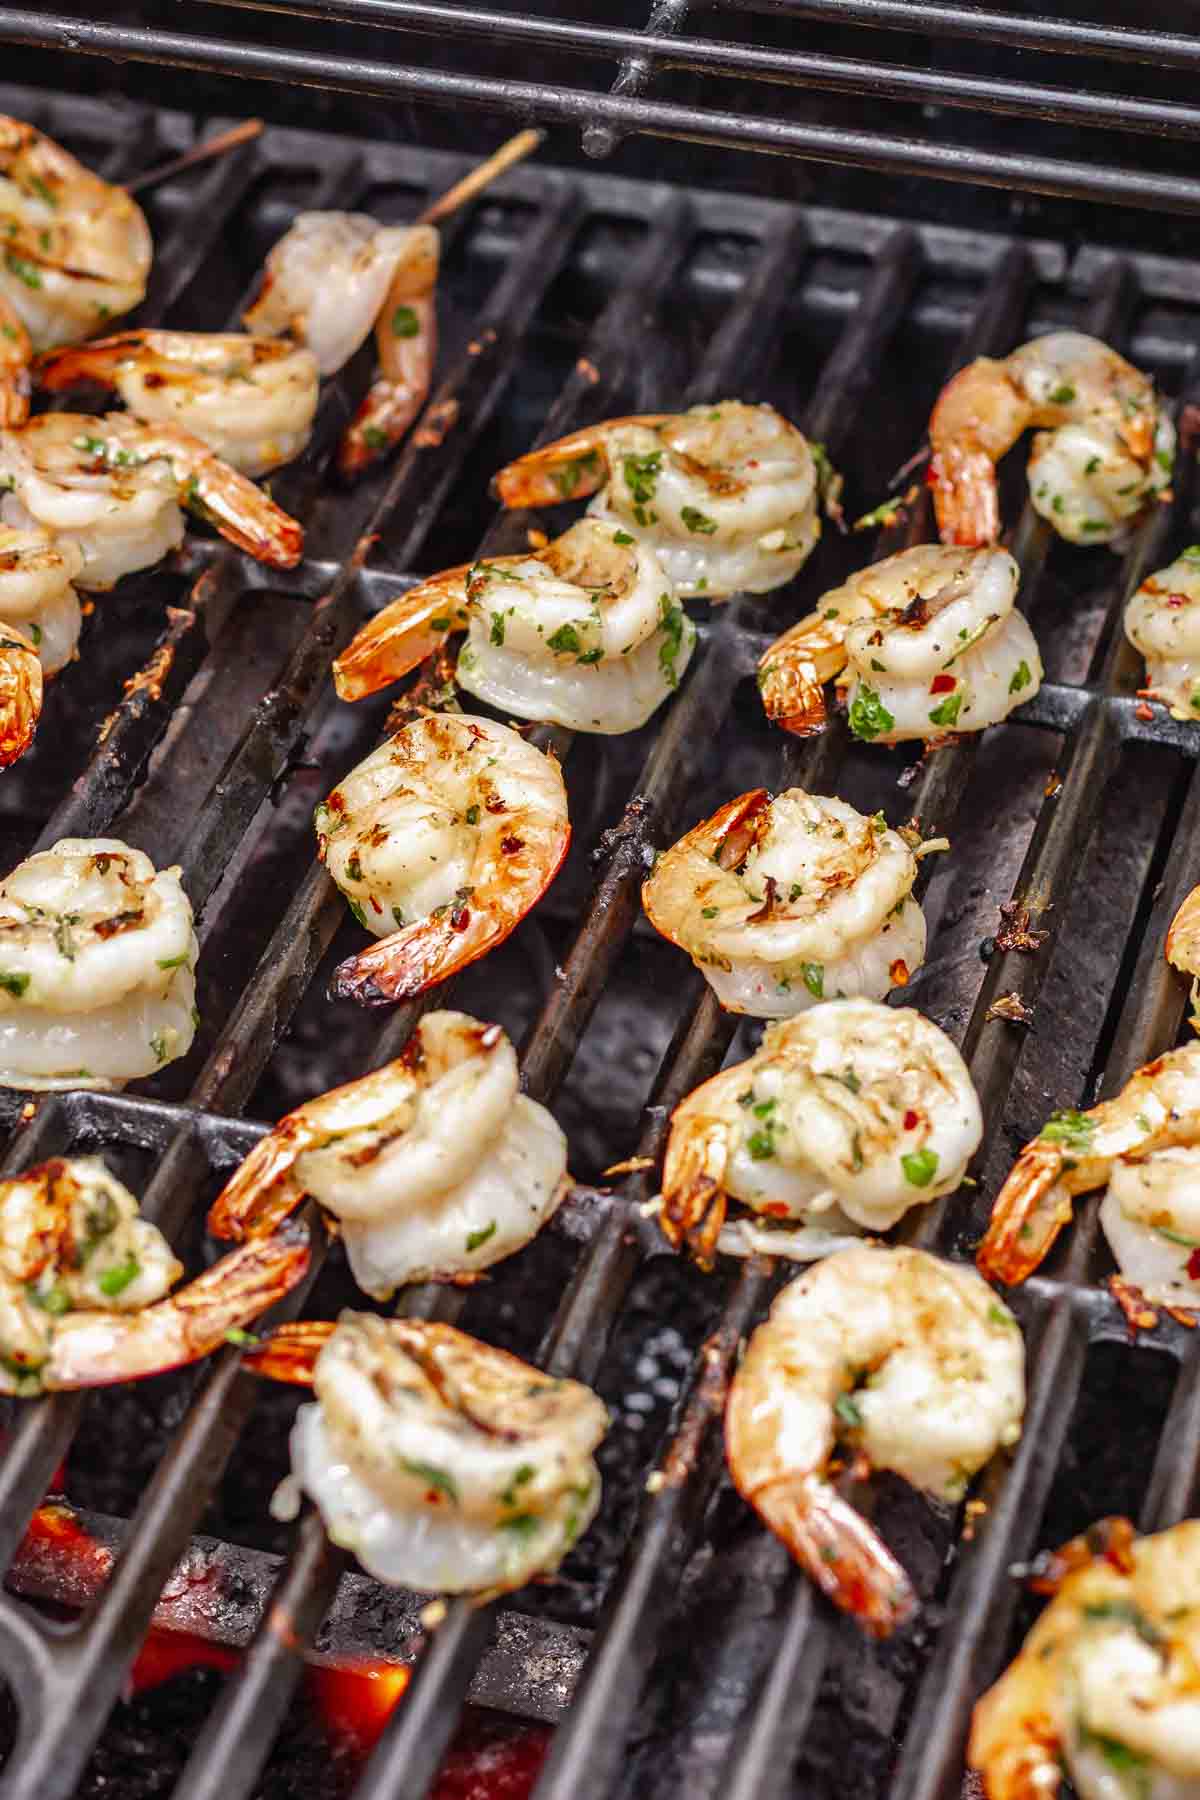 Shrimp cooking on a grill.